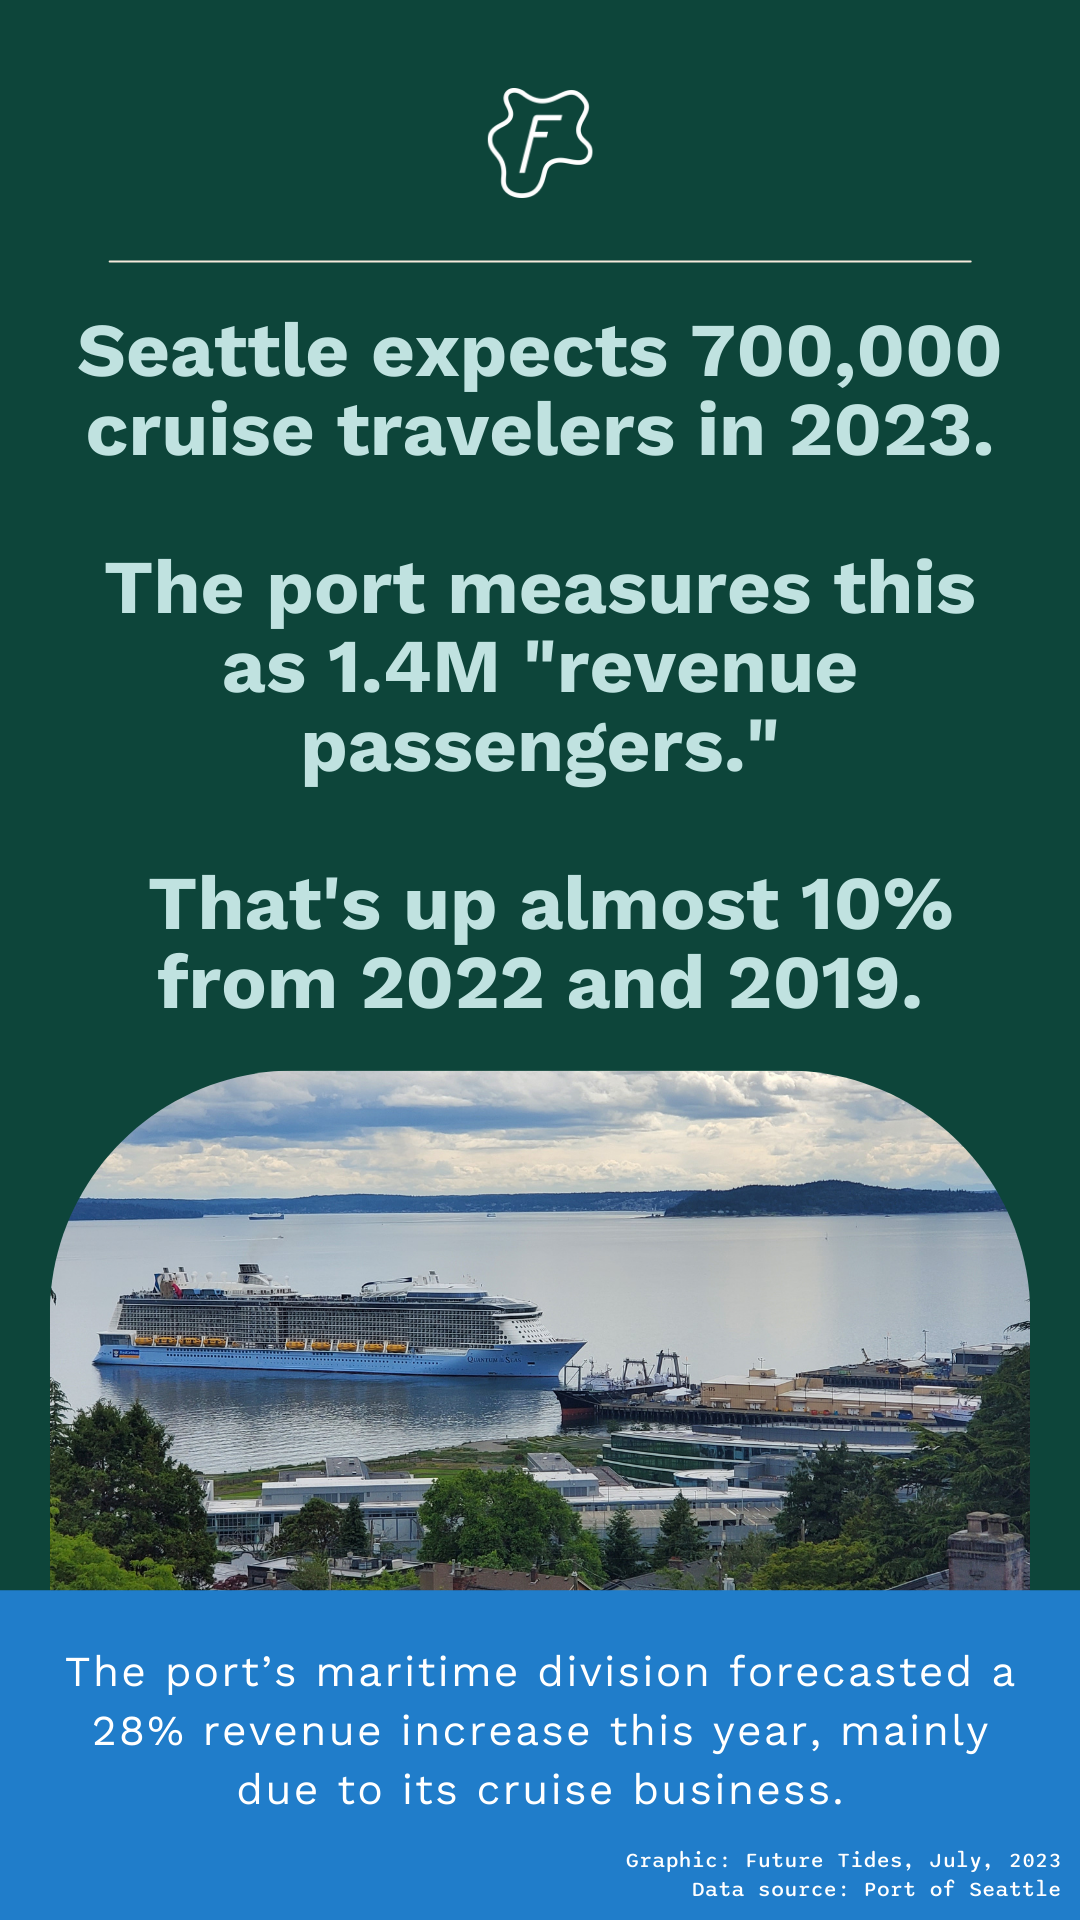 A graphic with a photo of a cruise ship and text about Seattle cruise ship travelers being up almost 10% in 2023.